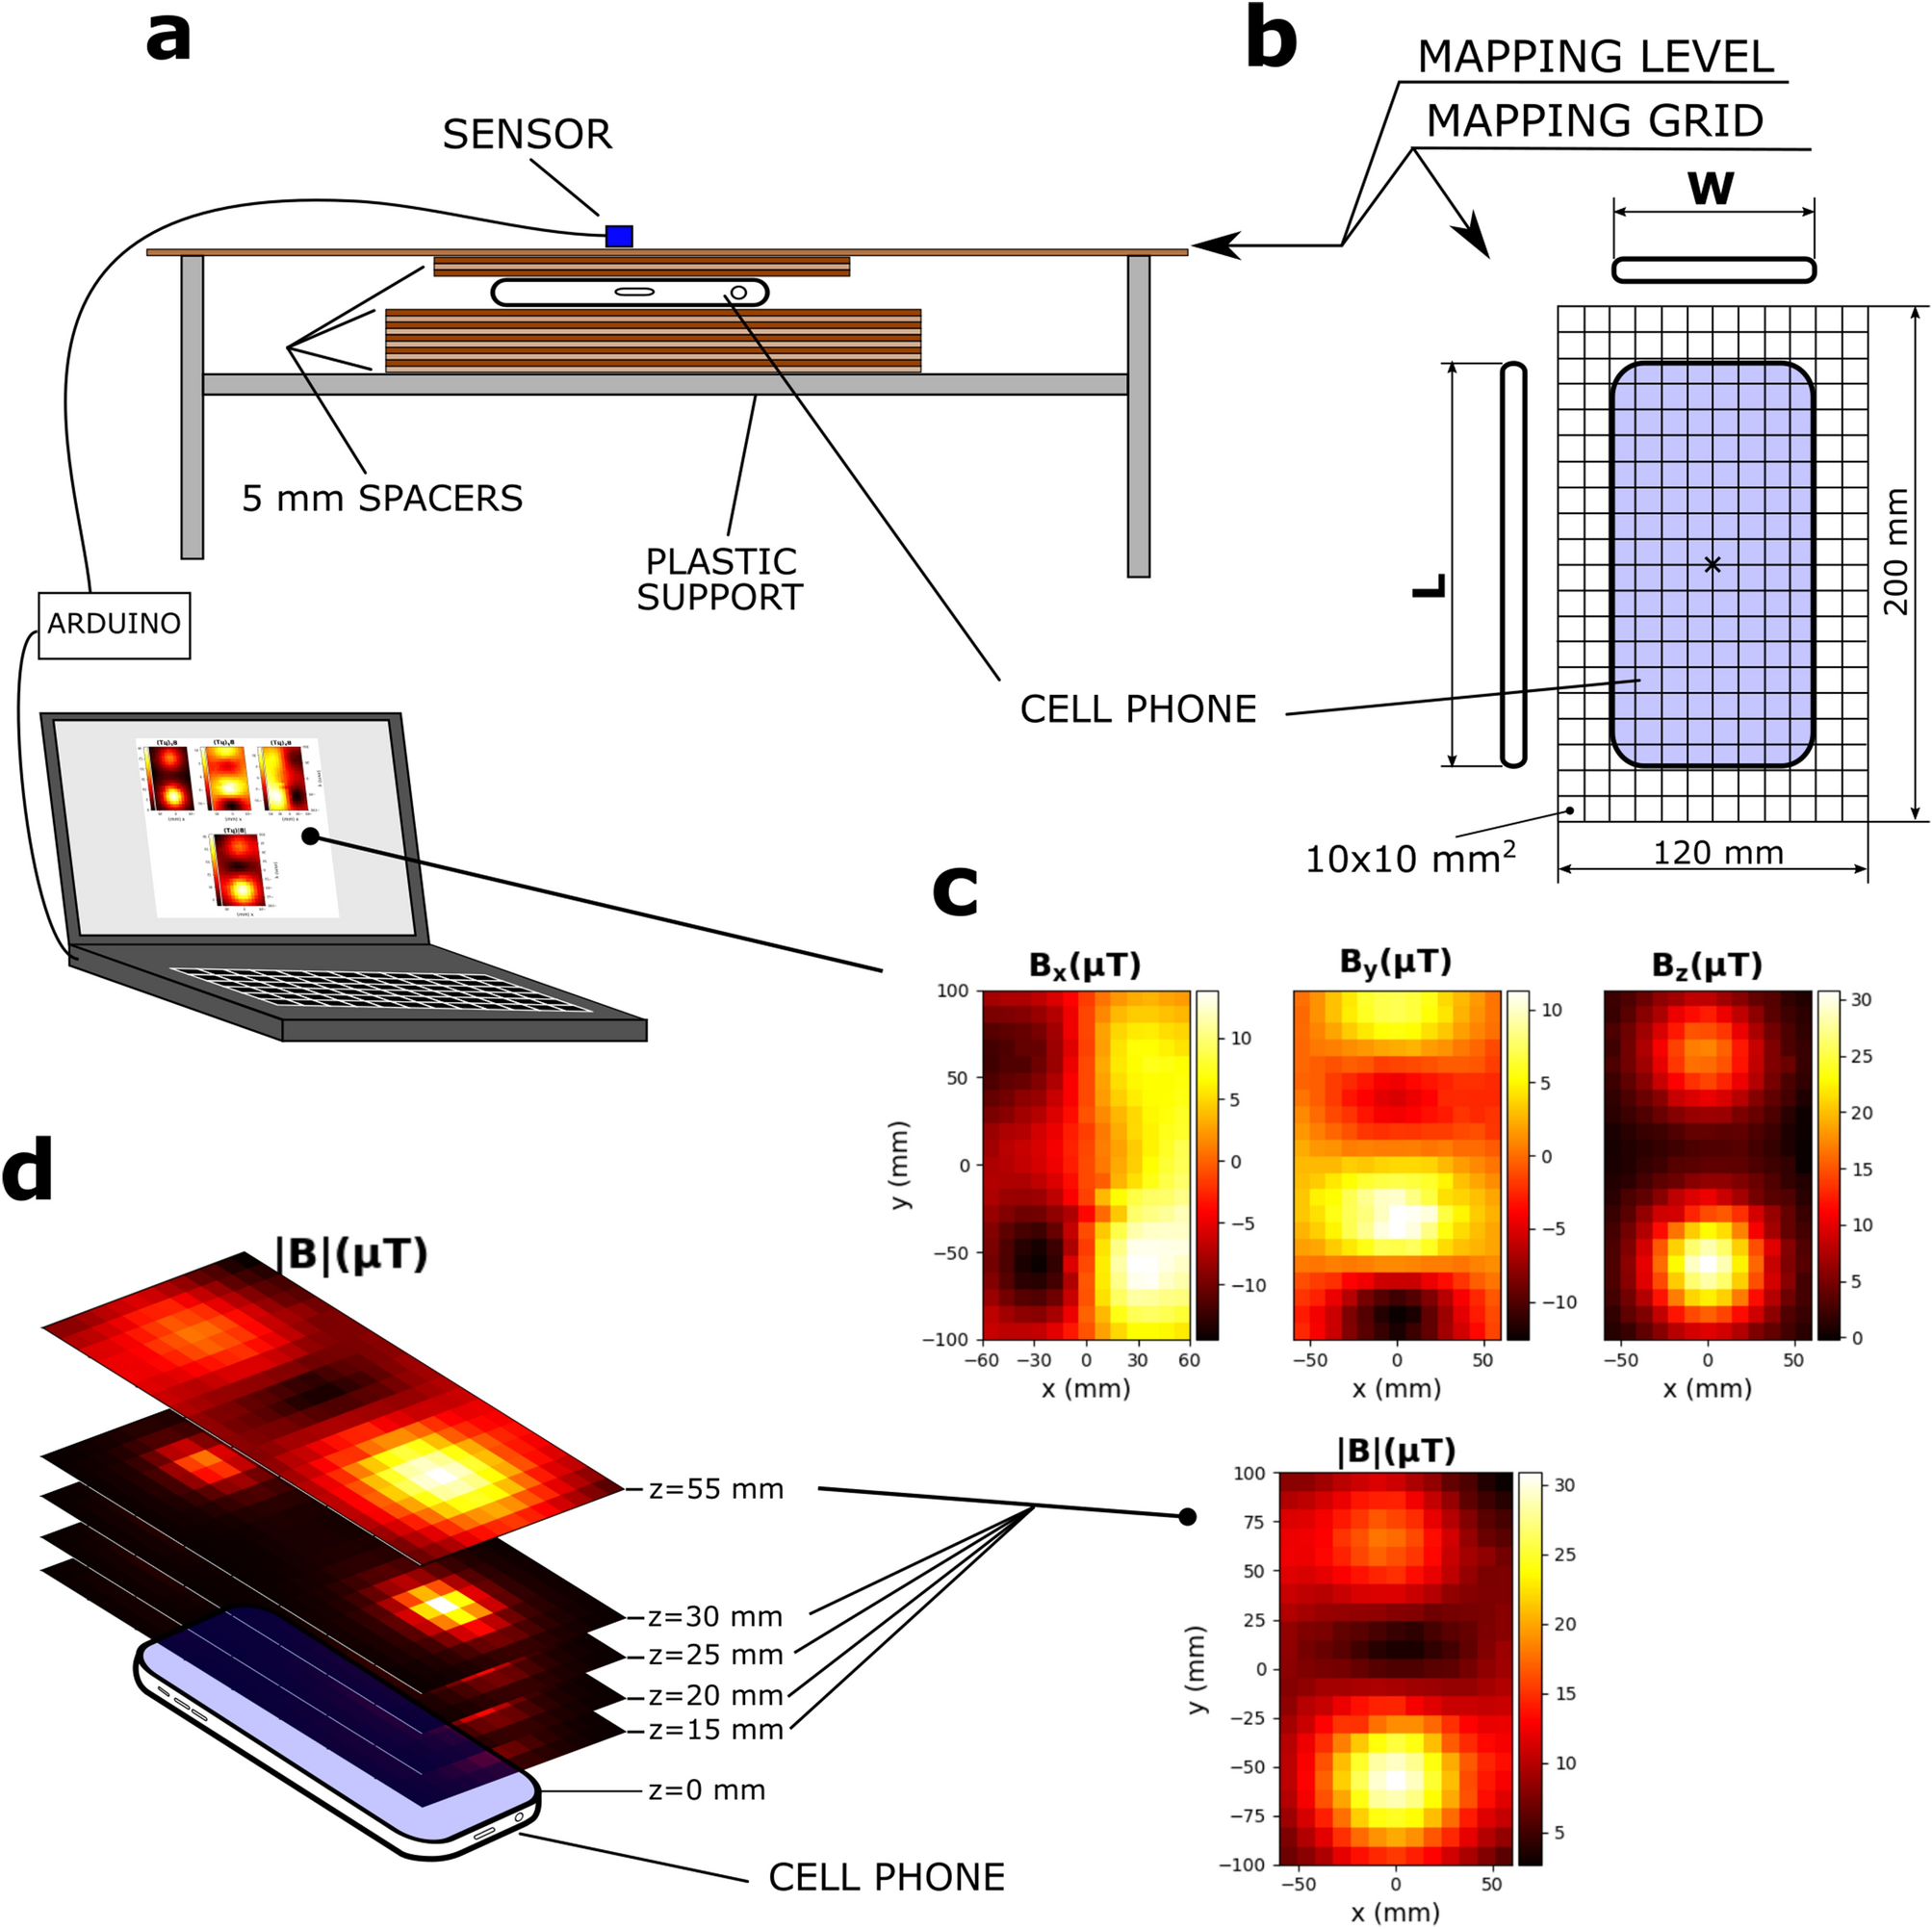 Mapping of static magnetic fields near the surface of mobile phones